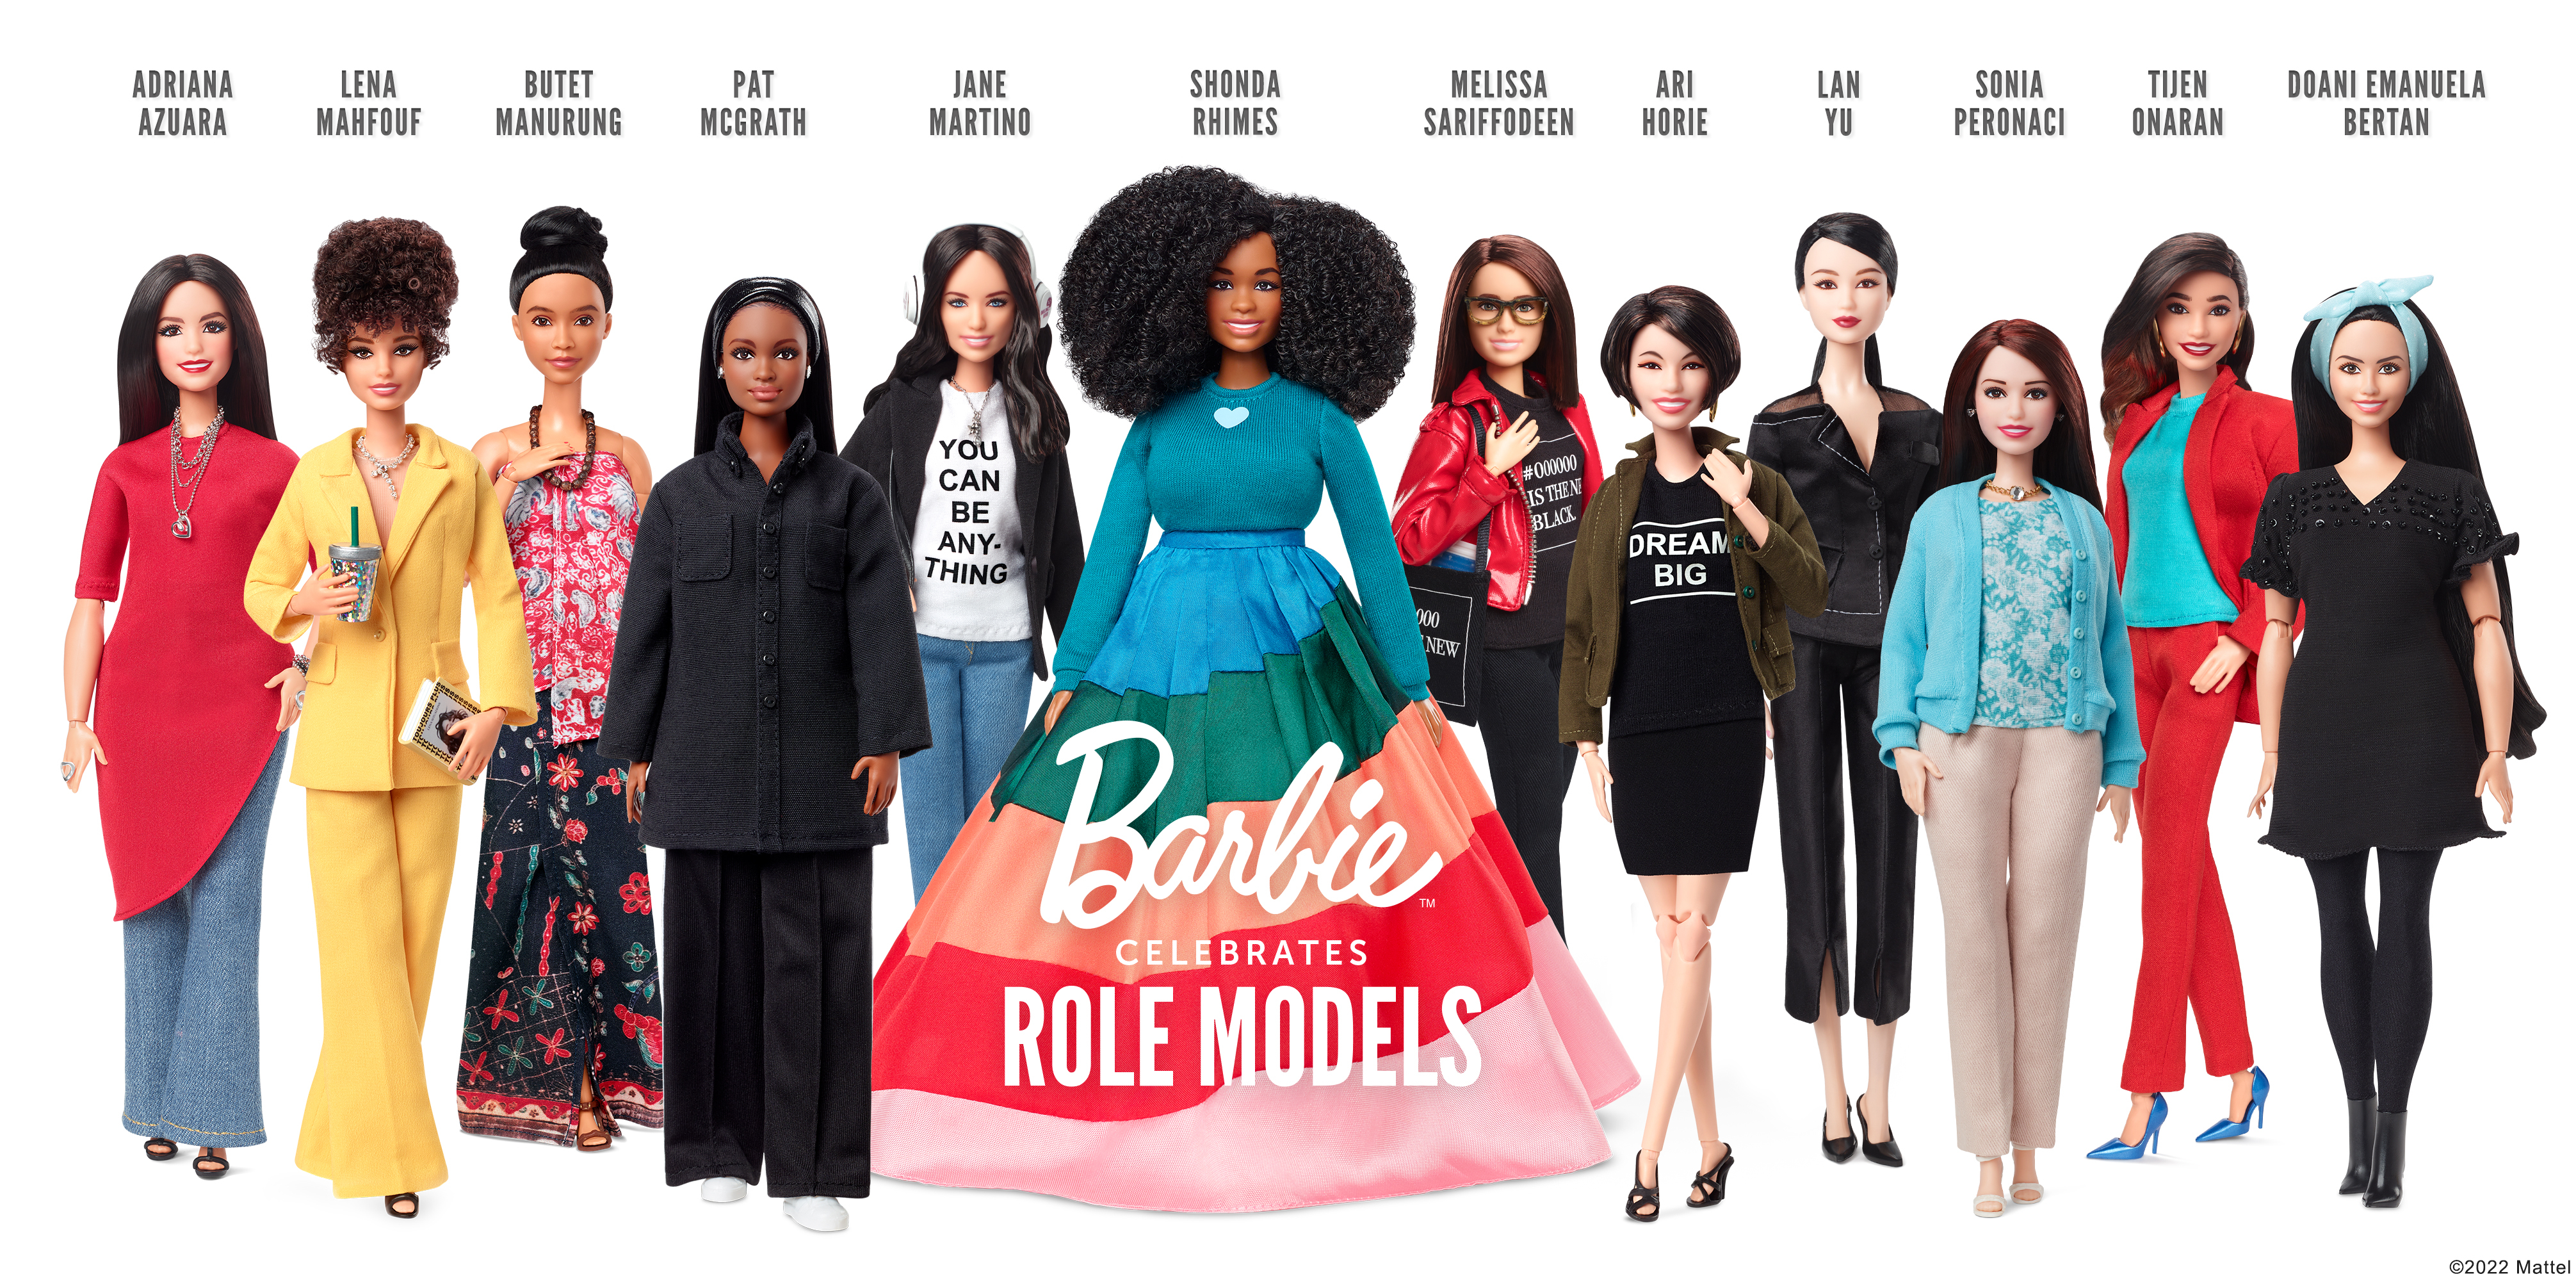 For International Women's Day 2022, Mattel introduced a new line of Barbie's celebrating female entrepreneurs and role models, including Shonda Rhimes, Pat McGrath, Lena Mahfouf and more.